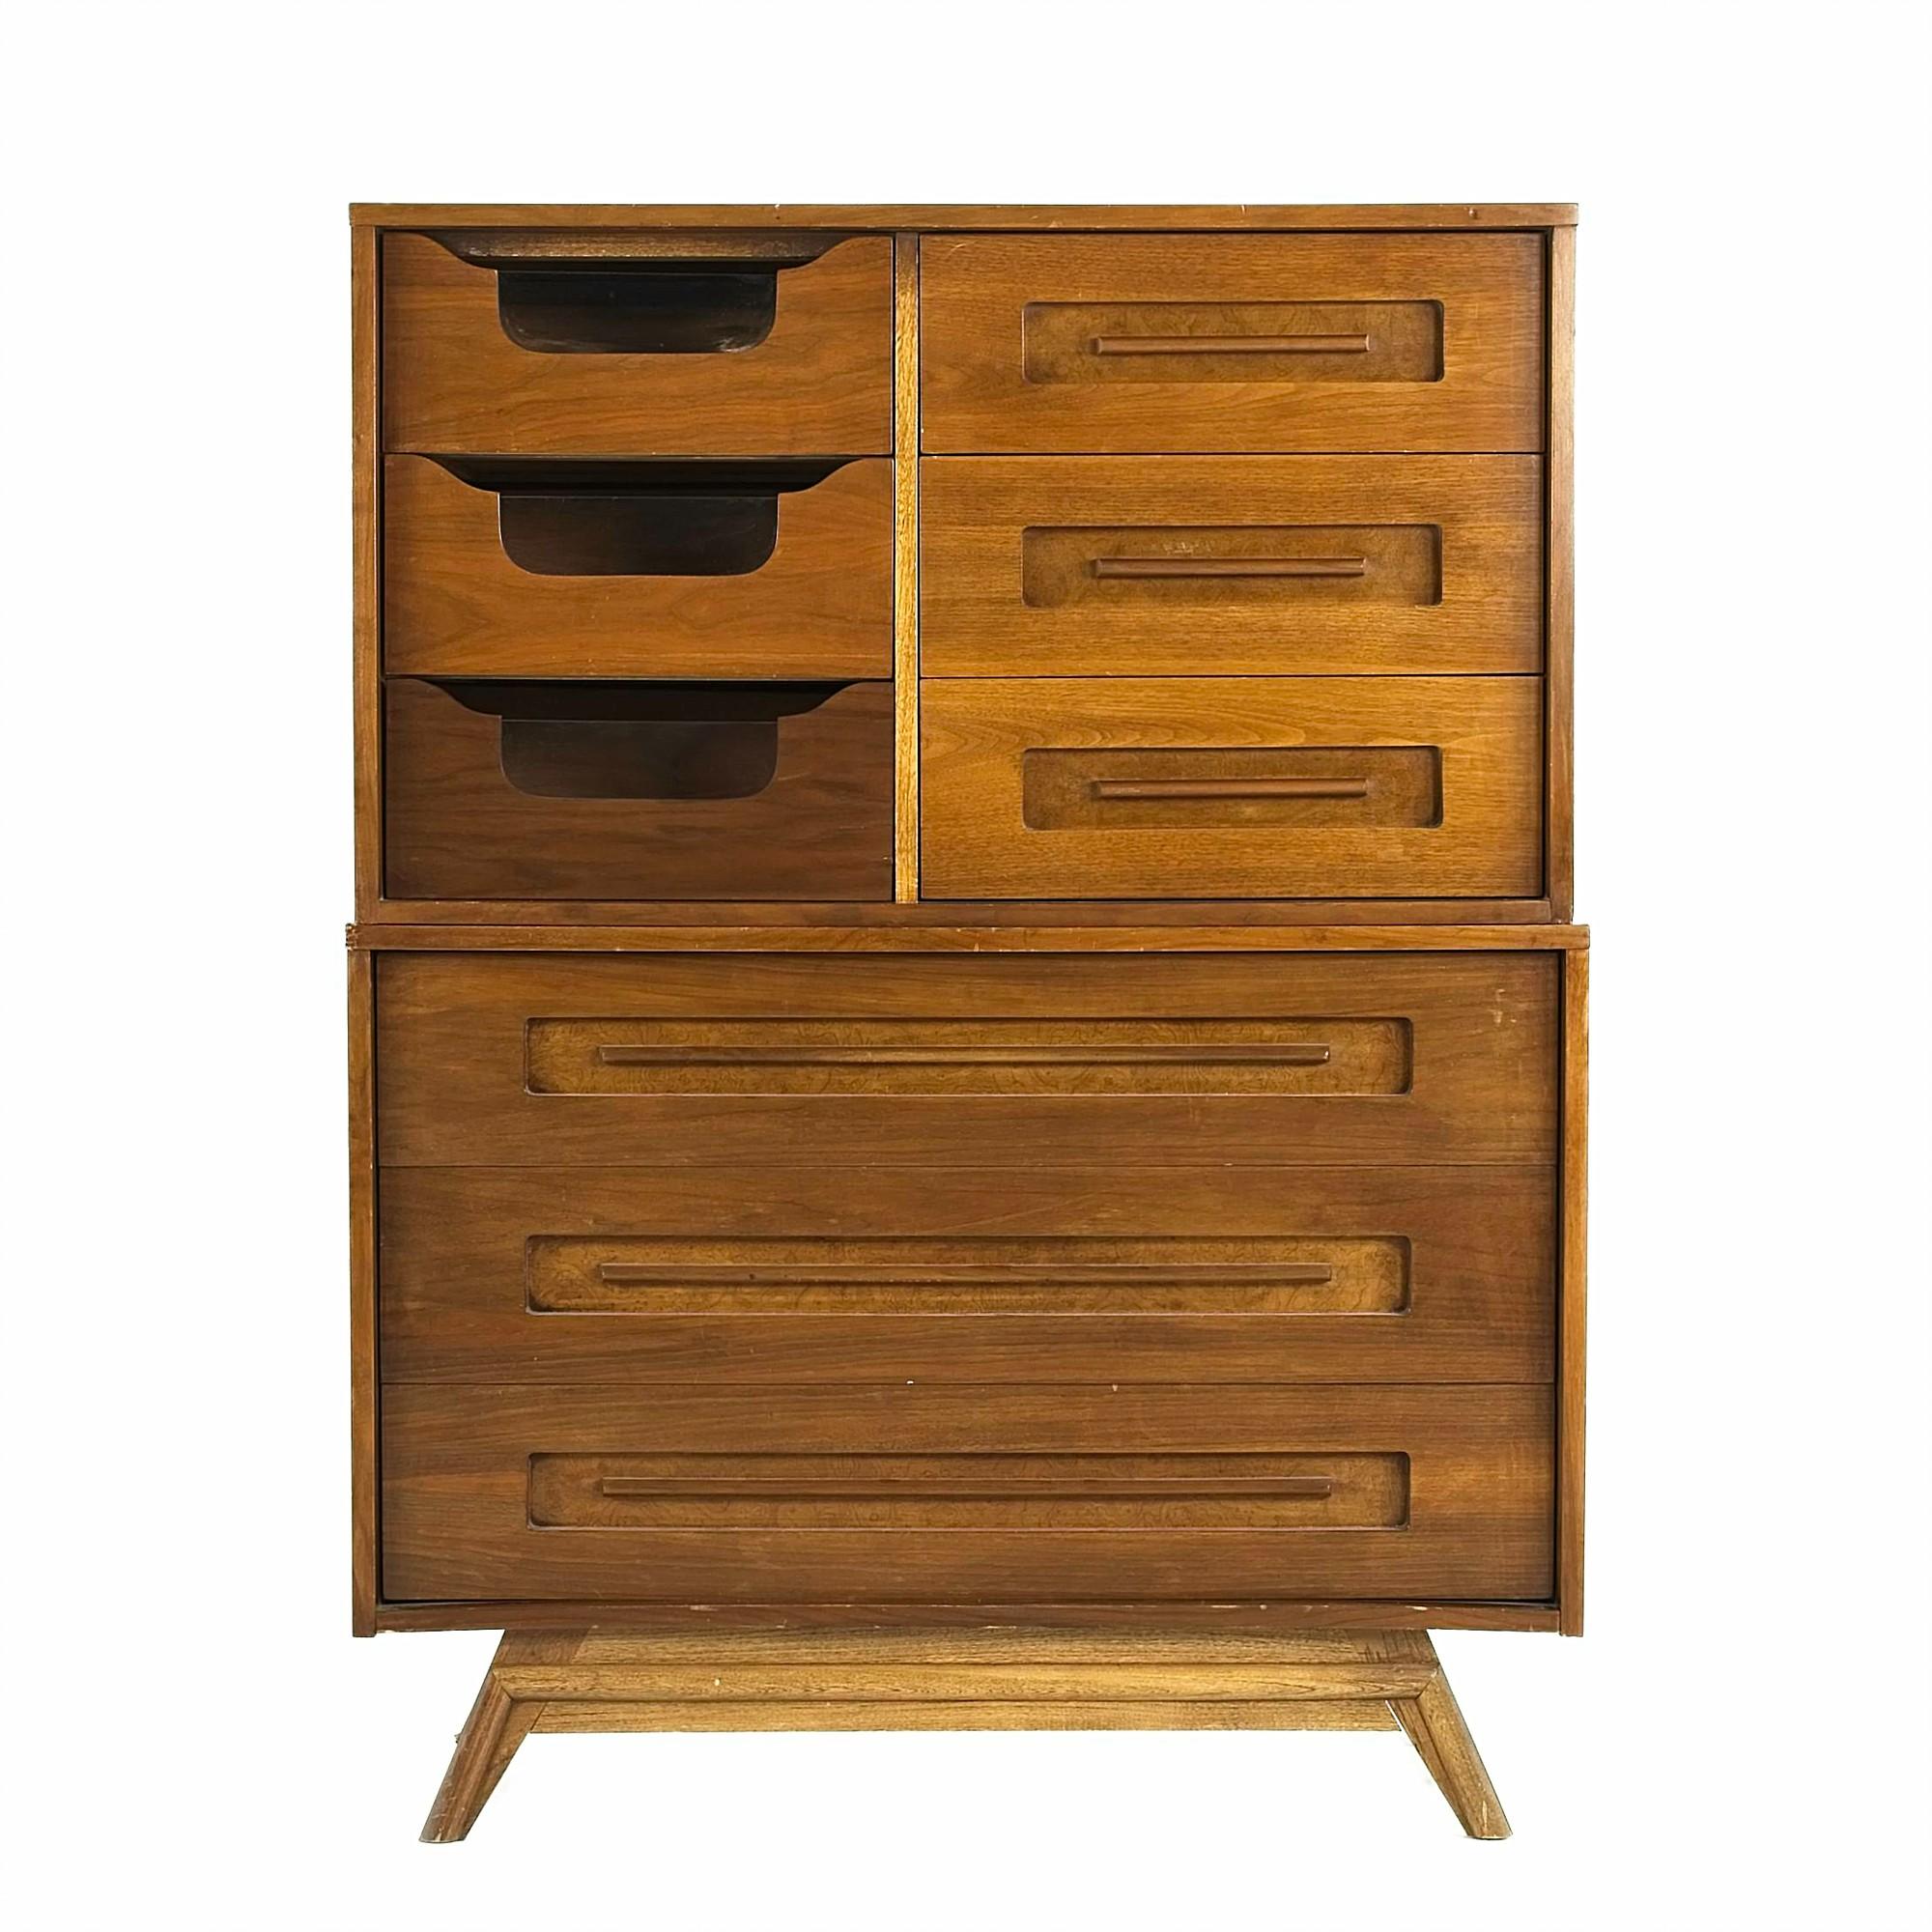 Young Manufacturing midcentury 2-piece walnut highboy dresser

The base measures 42 wide x 20 deep x 31.5 high
The top measures 41 wide x 20 deep x 24.25 high
Combined height: 55.75 inches

This price includes getting this piece in what we